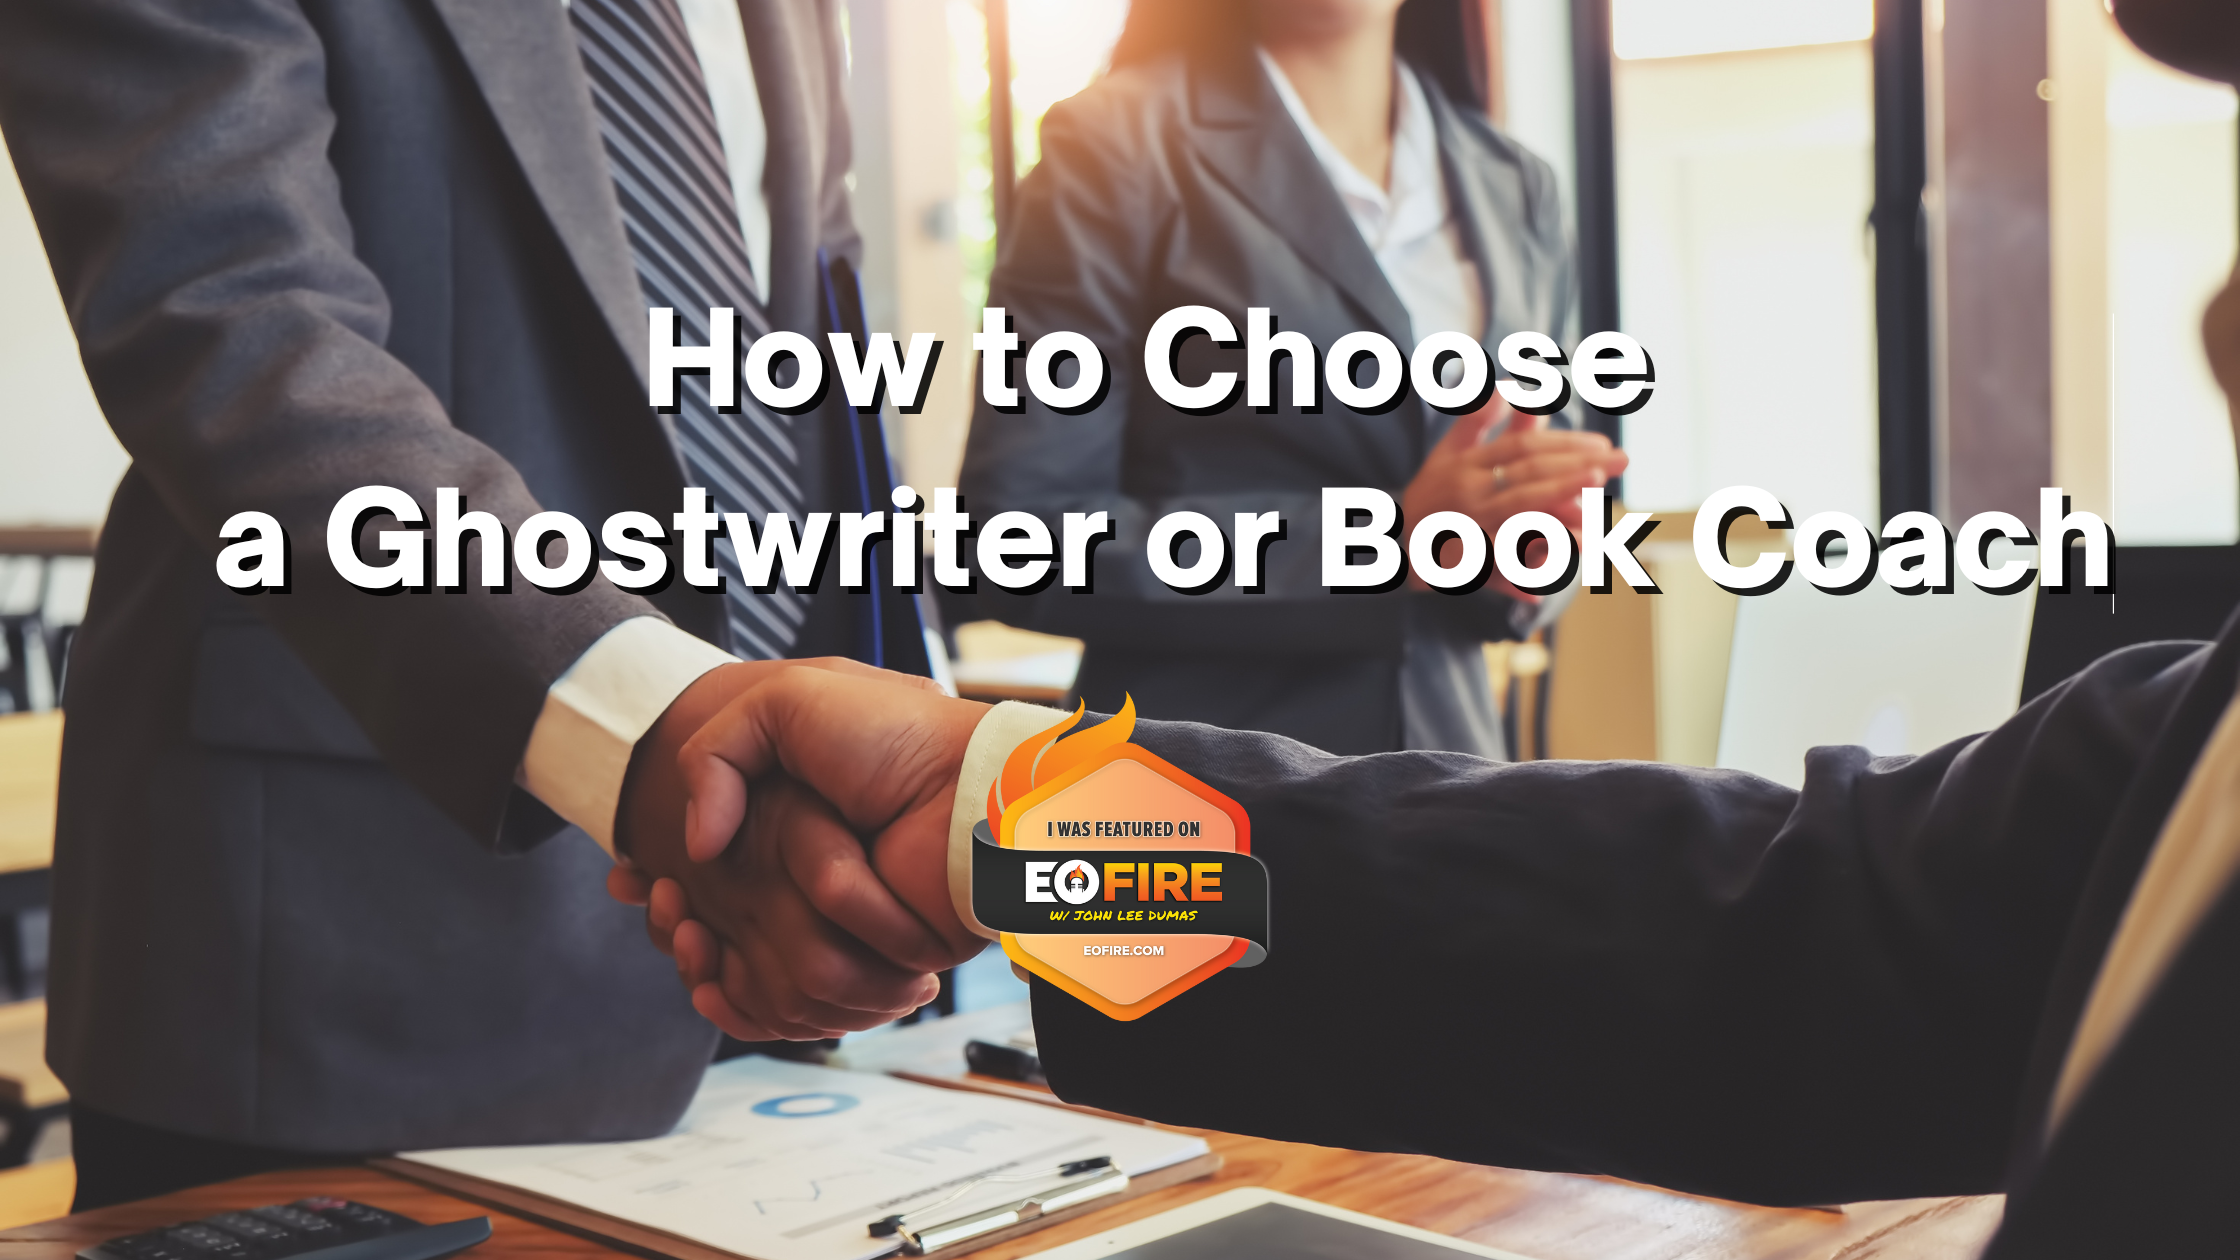 How to Choose a Ghostwriter or Book Coach